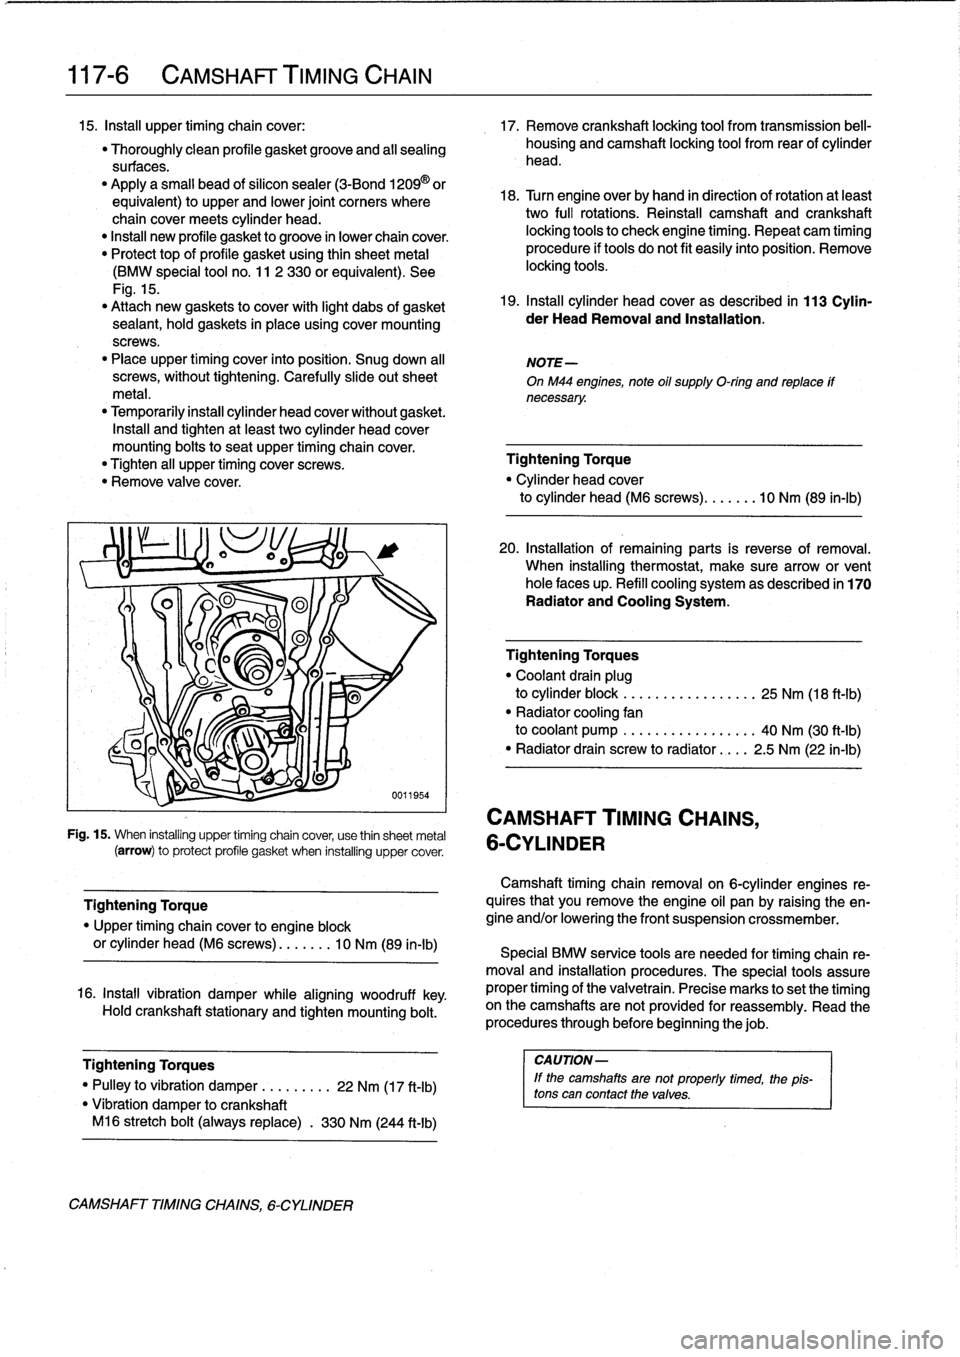 BMW 323i 1995 E36 Workshop Manual 
117-
6

	

CAMSHAFT
TIMING
CHAIN

15
.
Insta¡¡
upper
timing
chaincover
:

	

17
.
Remove
crankshaft
locking
tool
from
transmission
bell-

"
Thoroughly
clean
profile
gasketgroove
and
all
sealing

	
